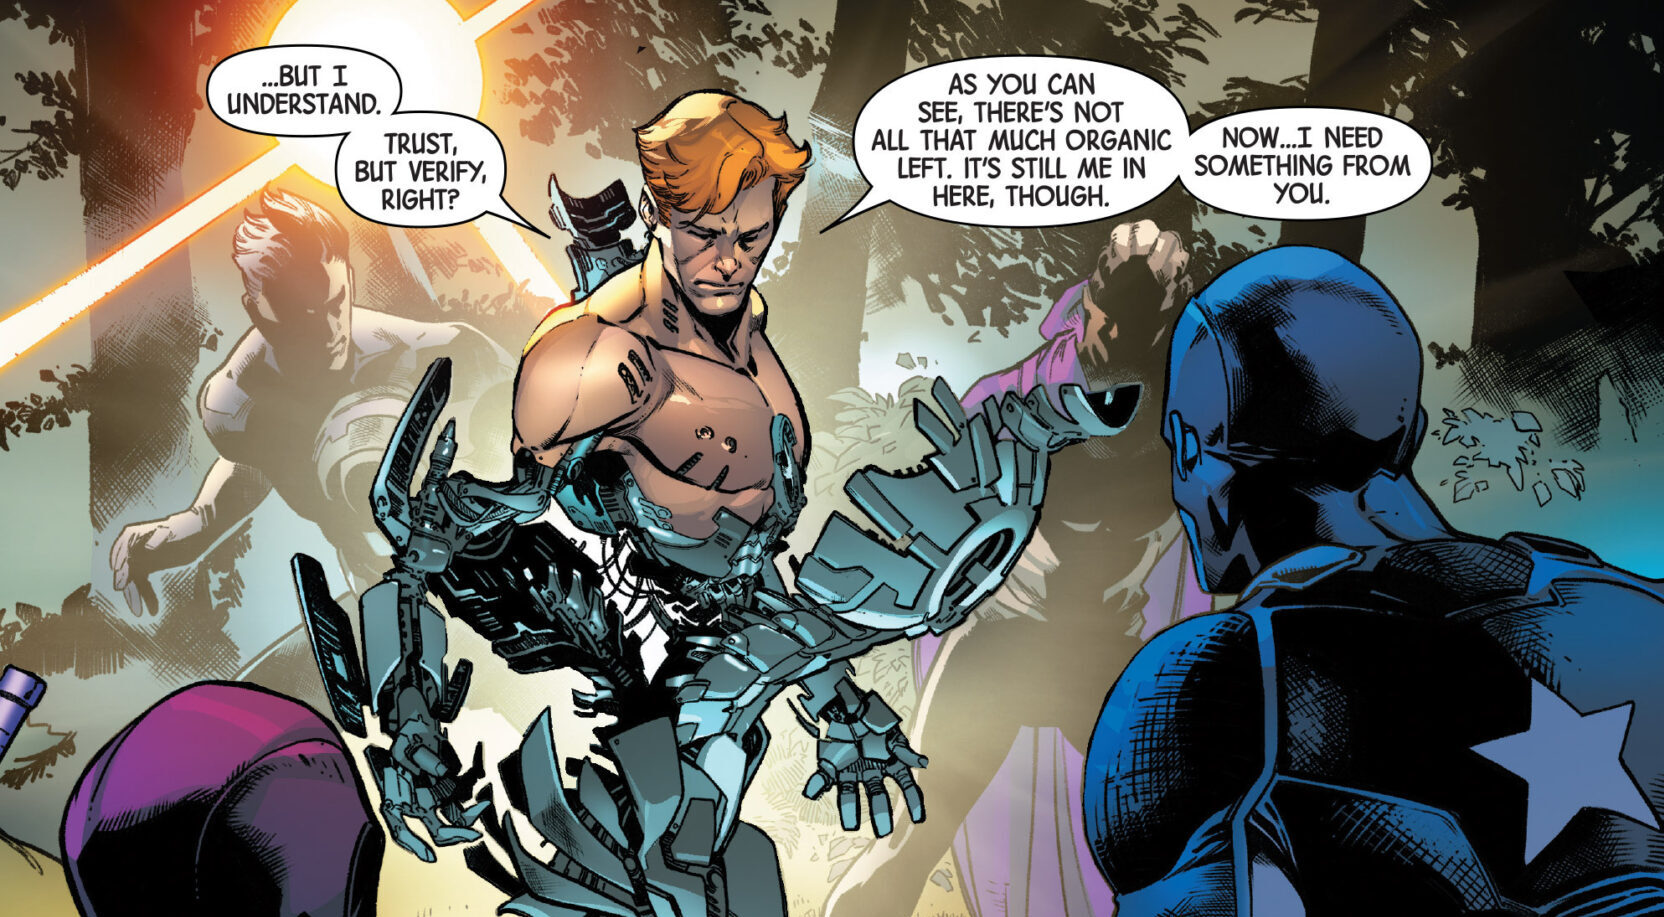 Hank Pym reveals that he's merged with Ultron in Uncanny Avengers Vol. 3 #10 "Who Are You Wearing?" (2016), Marvel Comics. Words by Gerry Duggan, art by Pepe Larraz, David Curiel, and Clayton Cowles.